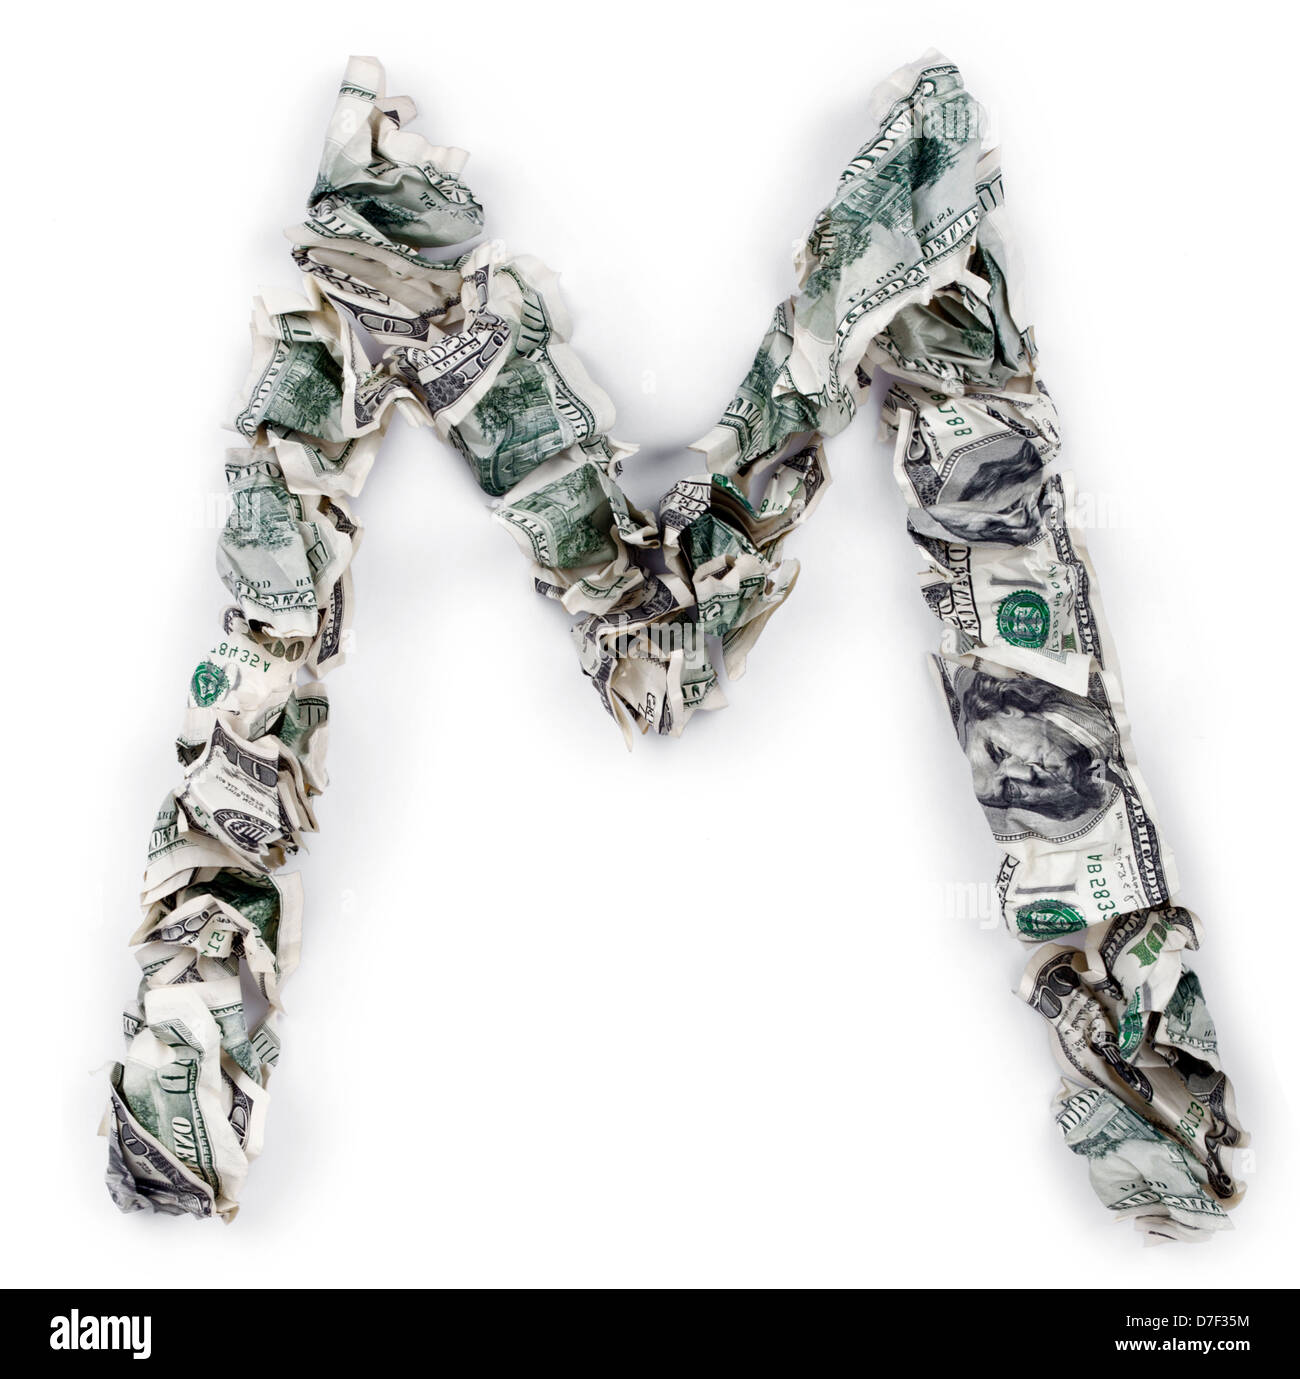 The letter 'm' made out of crimped 100$ bills. Isolated on white background. Stock Photo